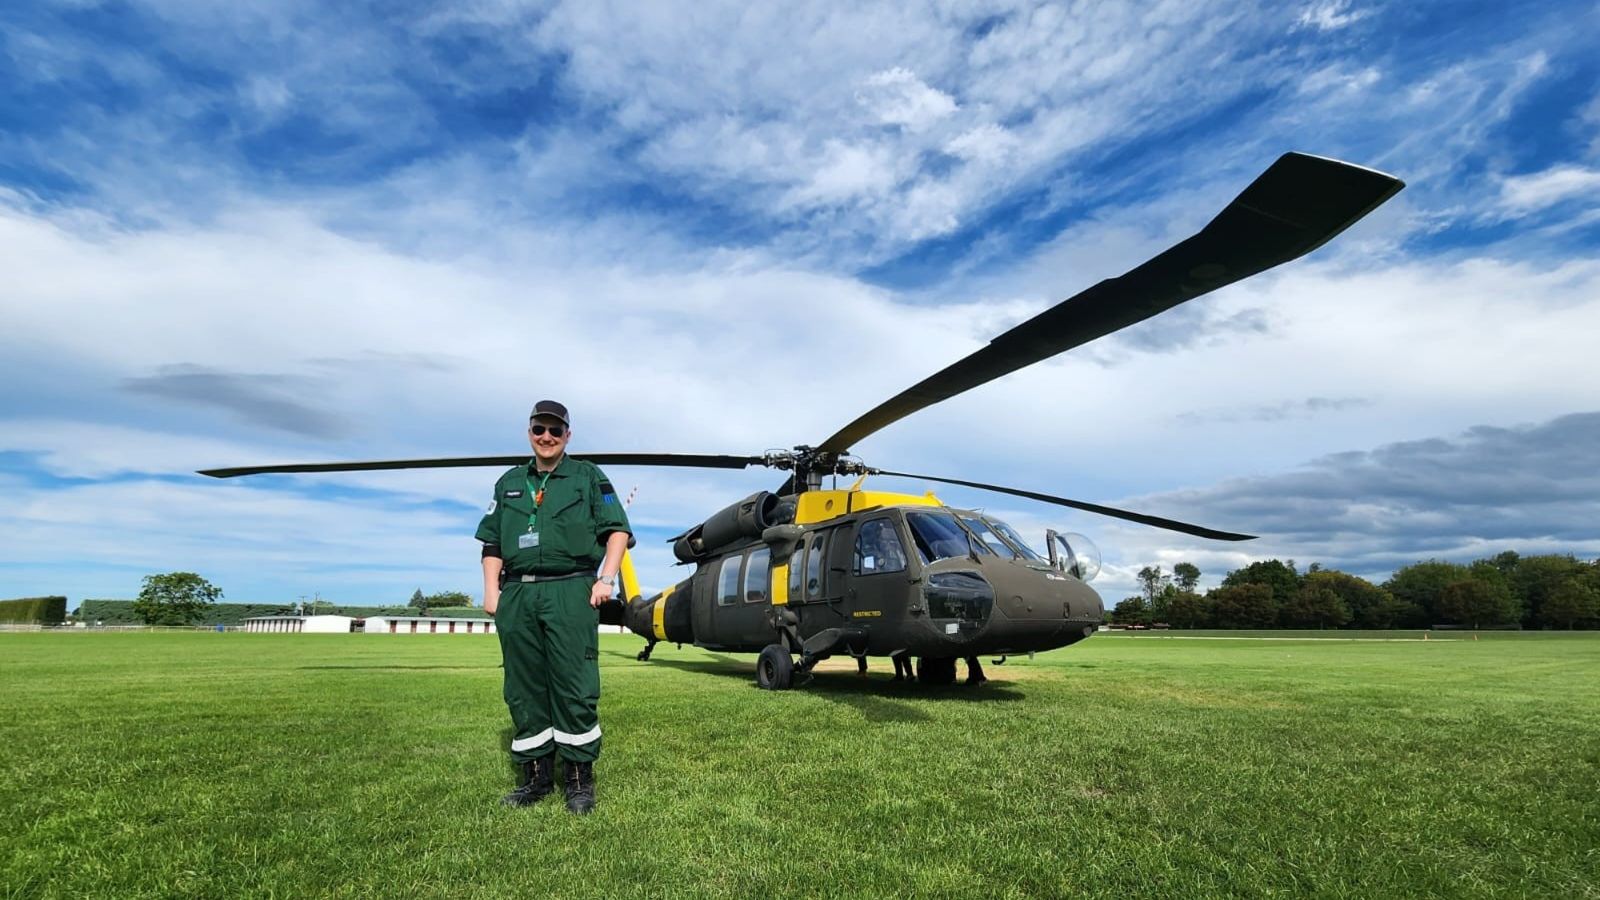 Man standing in front of helicopter.